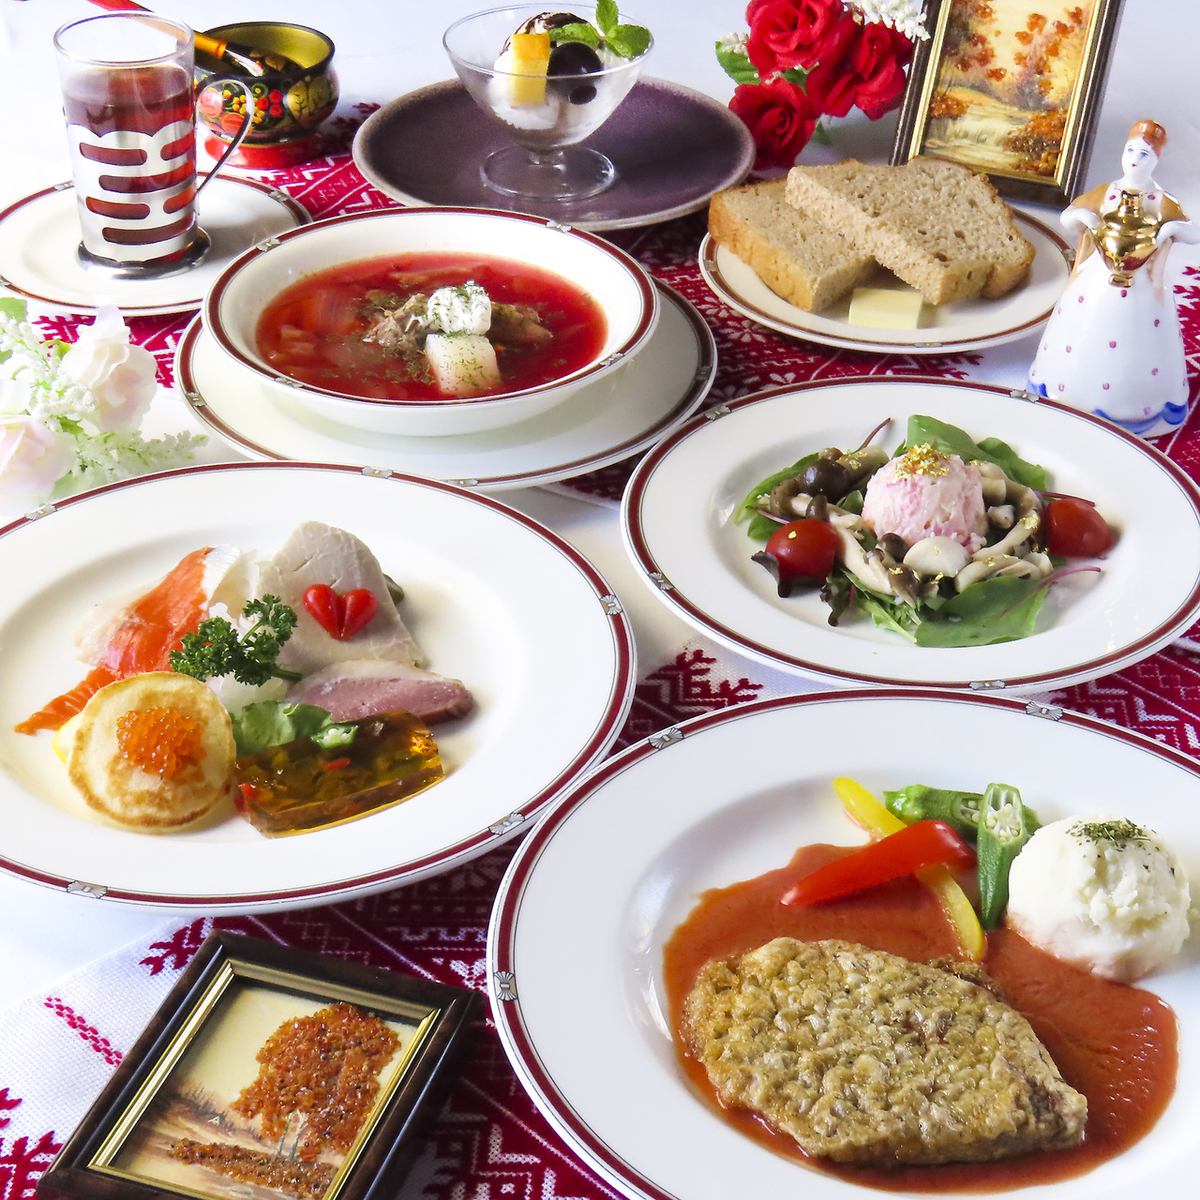 A restaurant where you can enjoy authentic Russian and Ukrainian cuisine while looking at the night view of Kyoto.